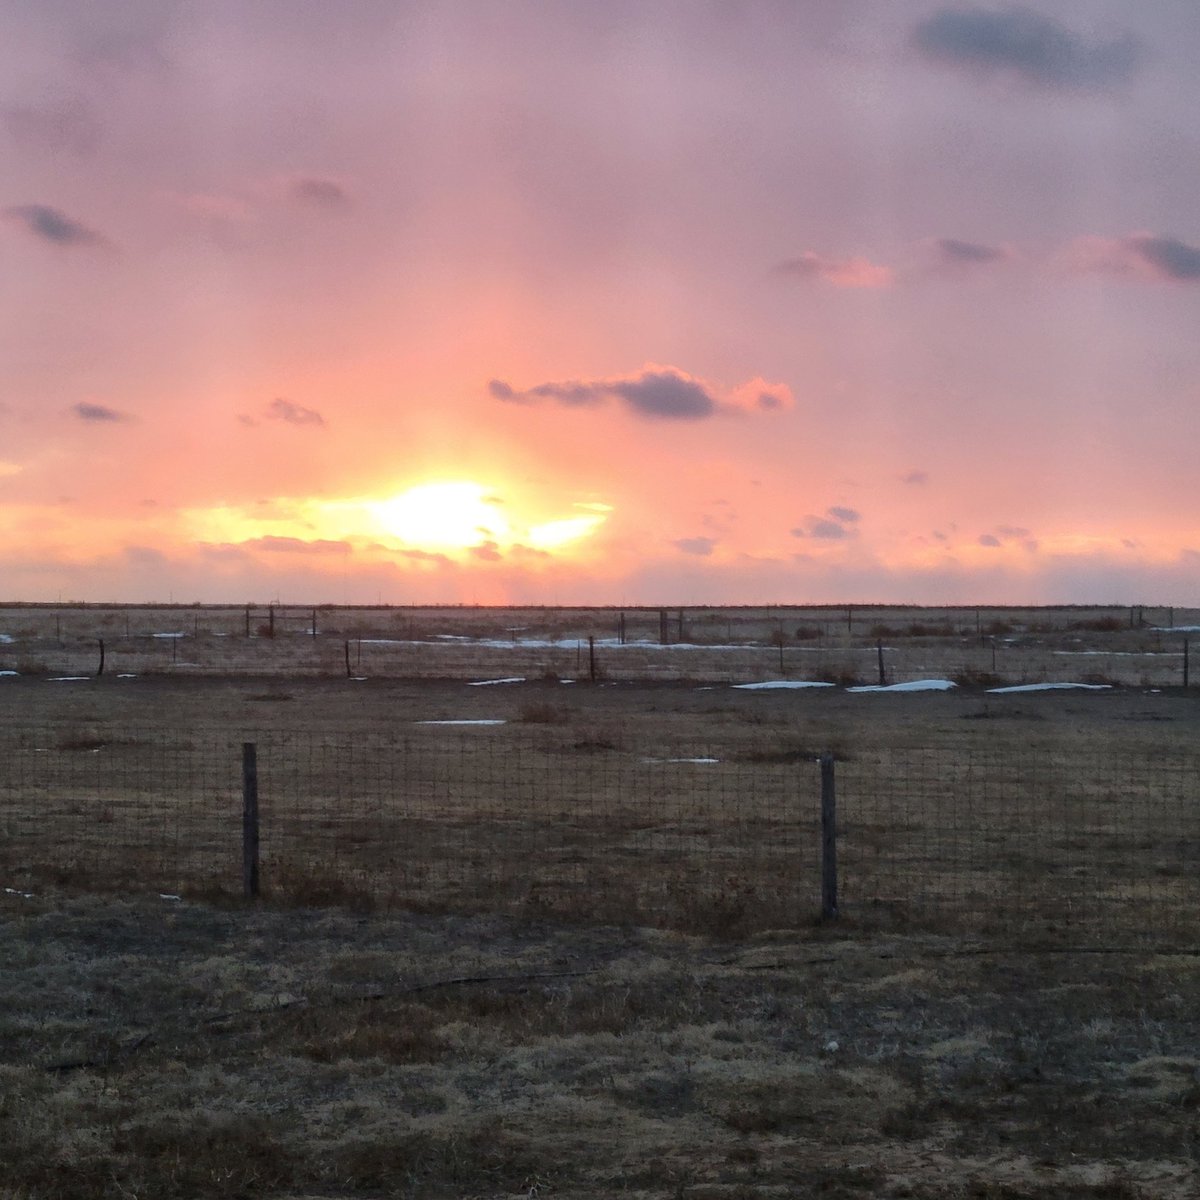 The sun did shine this evening and it is 🥶. The images were shot from inside through a window screen. The clouds were moving through quickly. First shot 5:35, second shot 5:54.

#MiddleOfEverywhere
#sunset 
#Oklahoma 
#WildWildWest